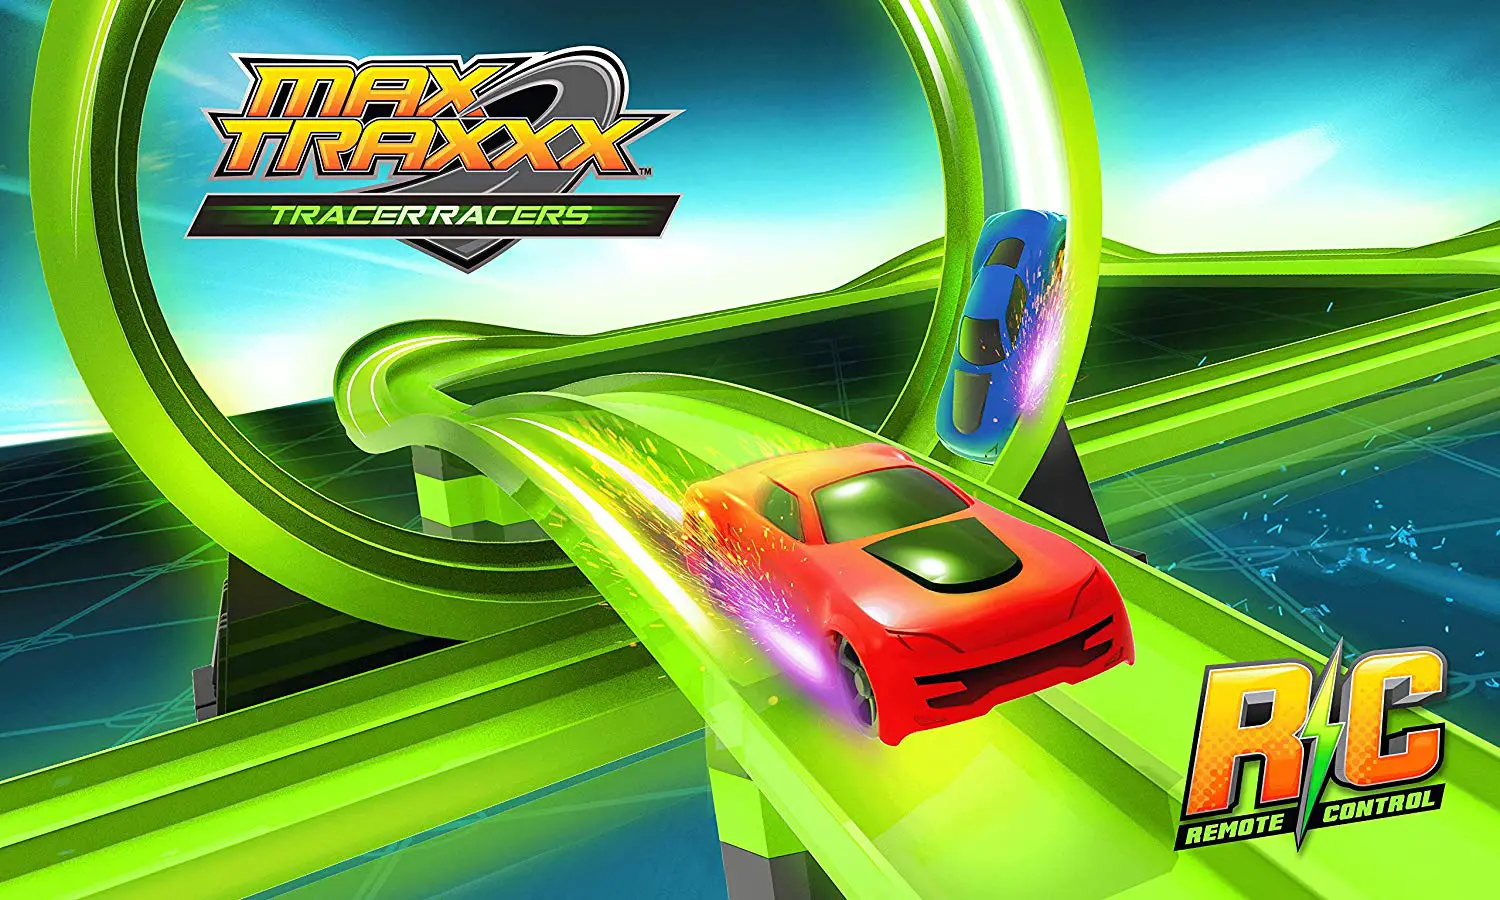 The Tracer Racers Remote Control Infinity Loop Set features a glow-in-the-dark dual loop.